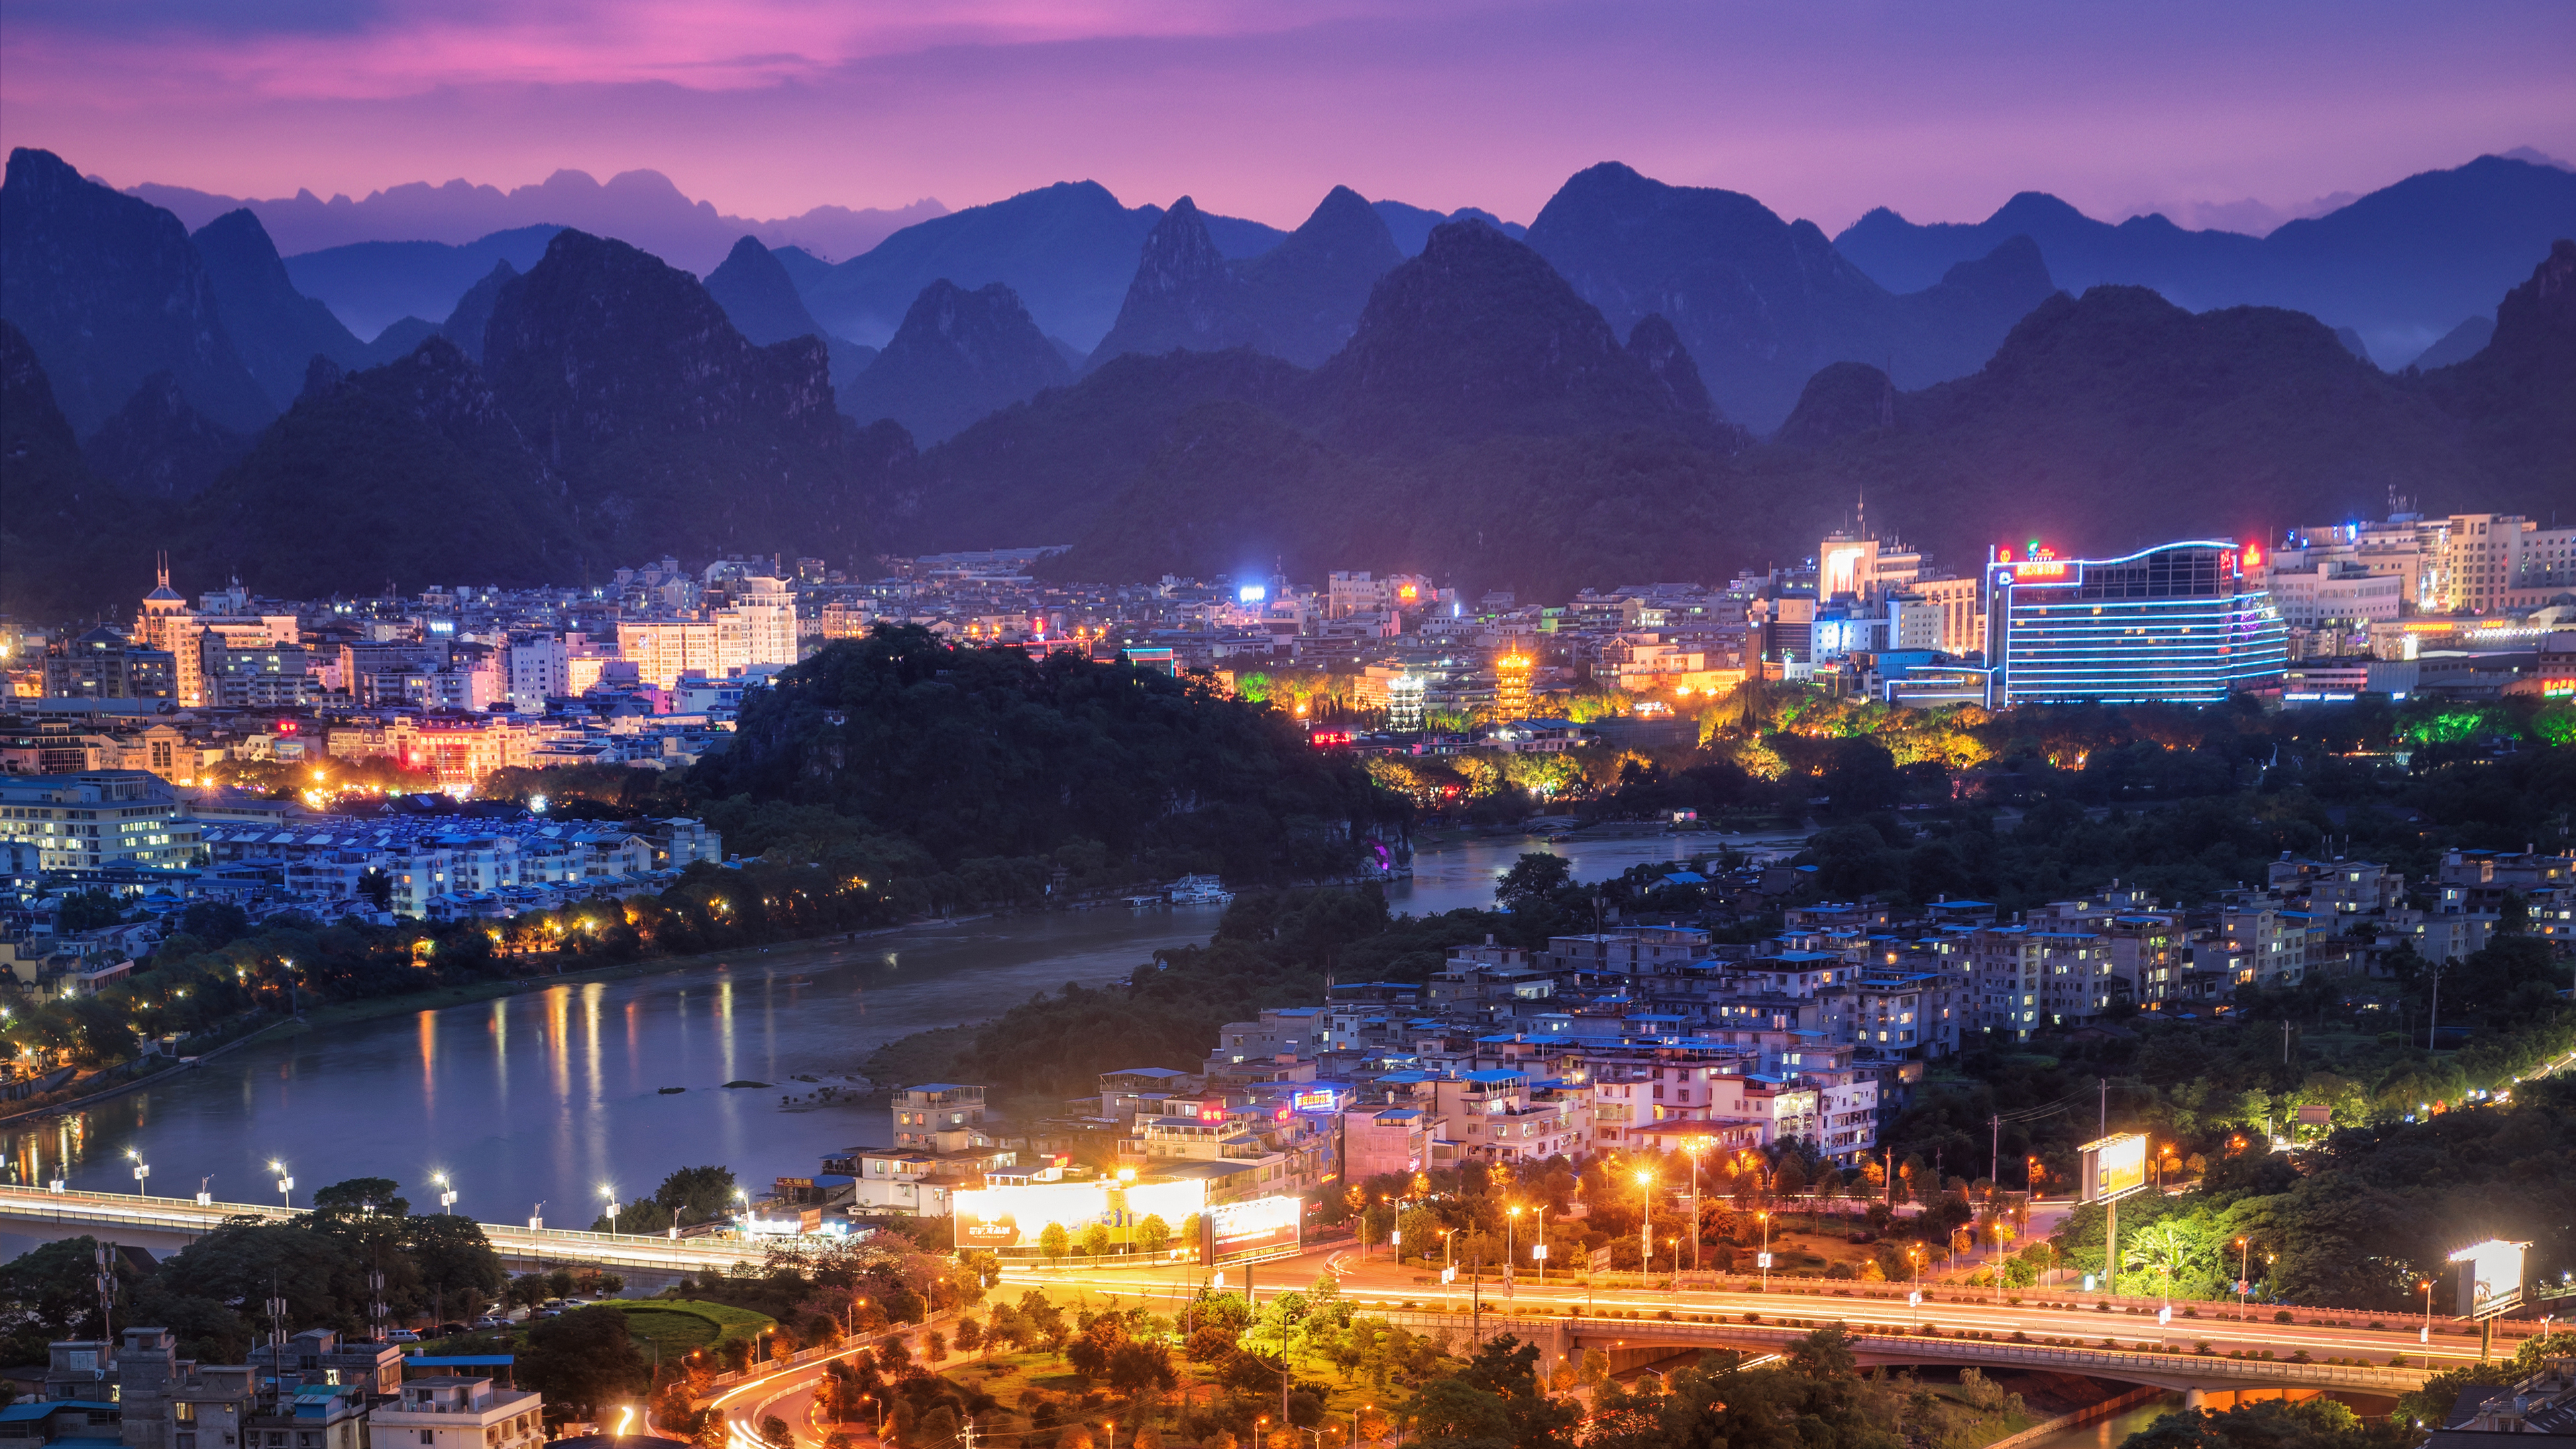 General 3840x2160 cityscape 4K building water night lights mountains hills bridge river Guilin China city